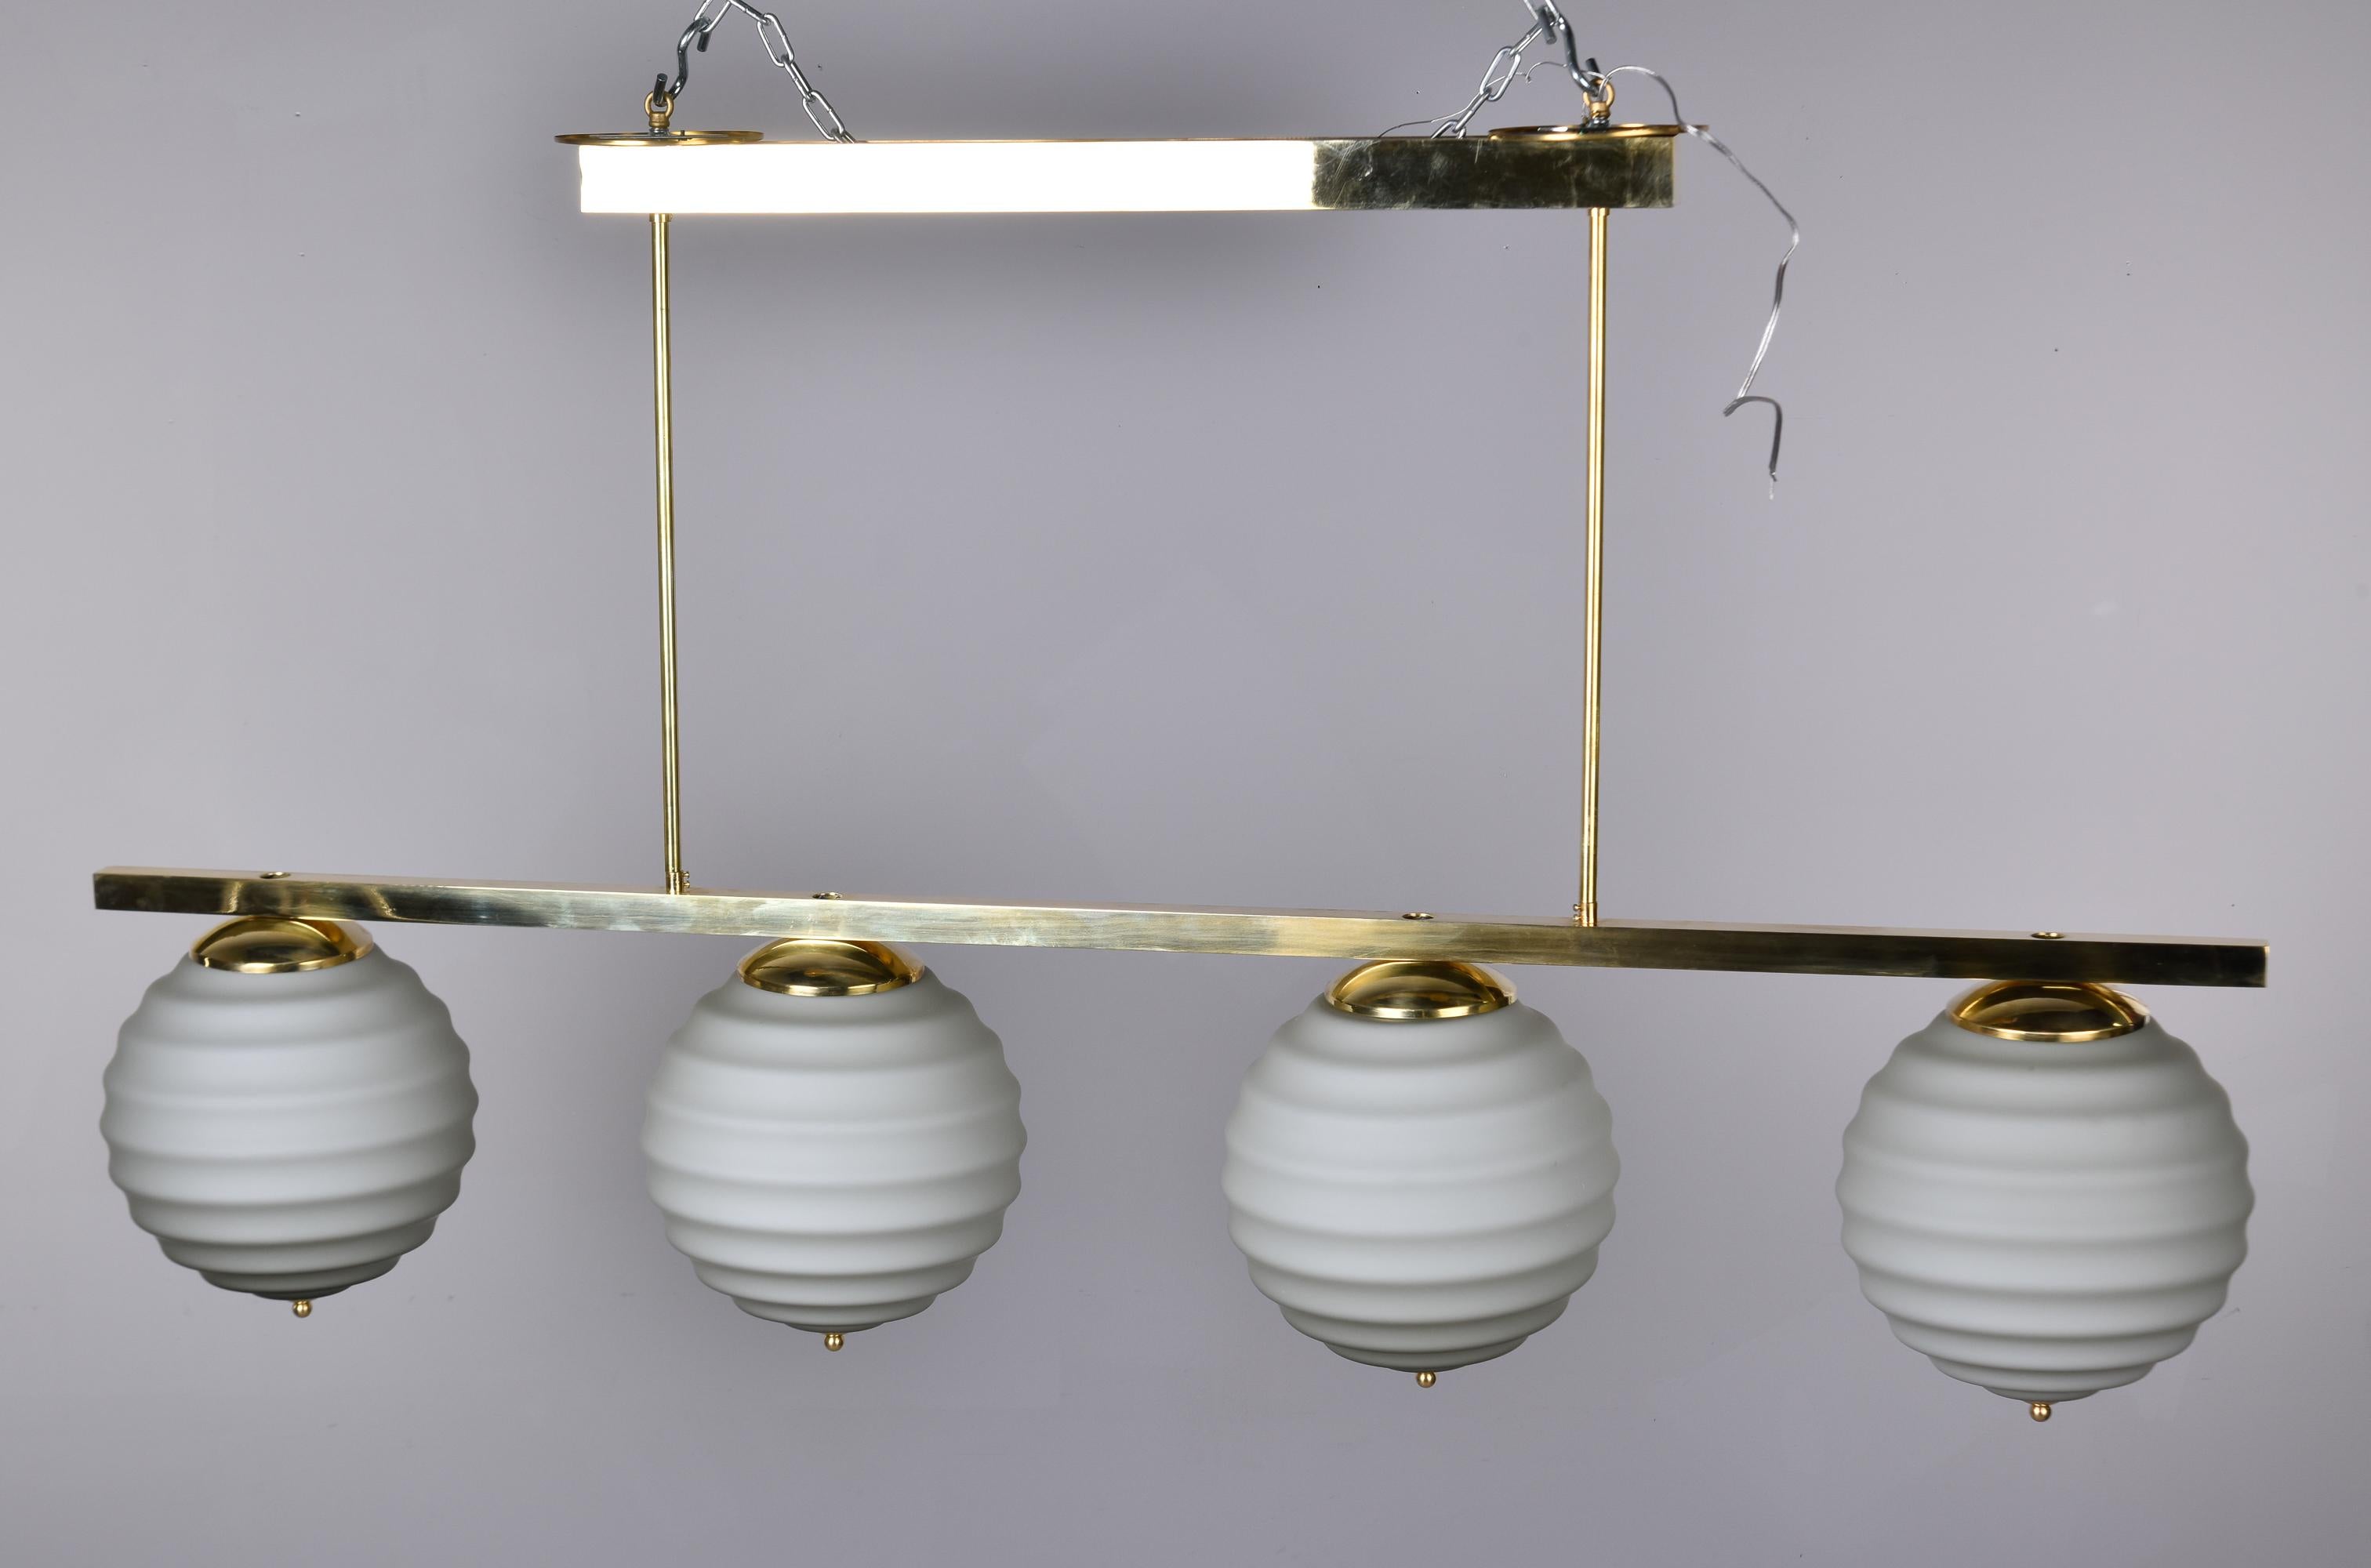 New Italian Fixture with Four Pale Taupe Globes on Horizontal Brass Bar For Sale 2